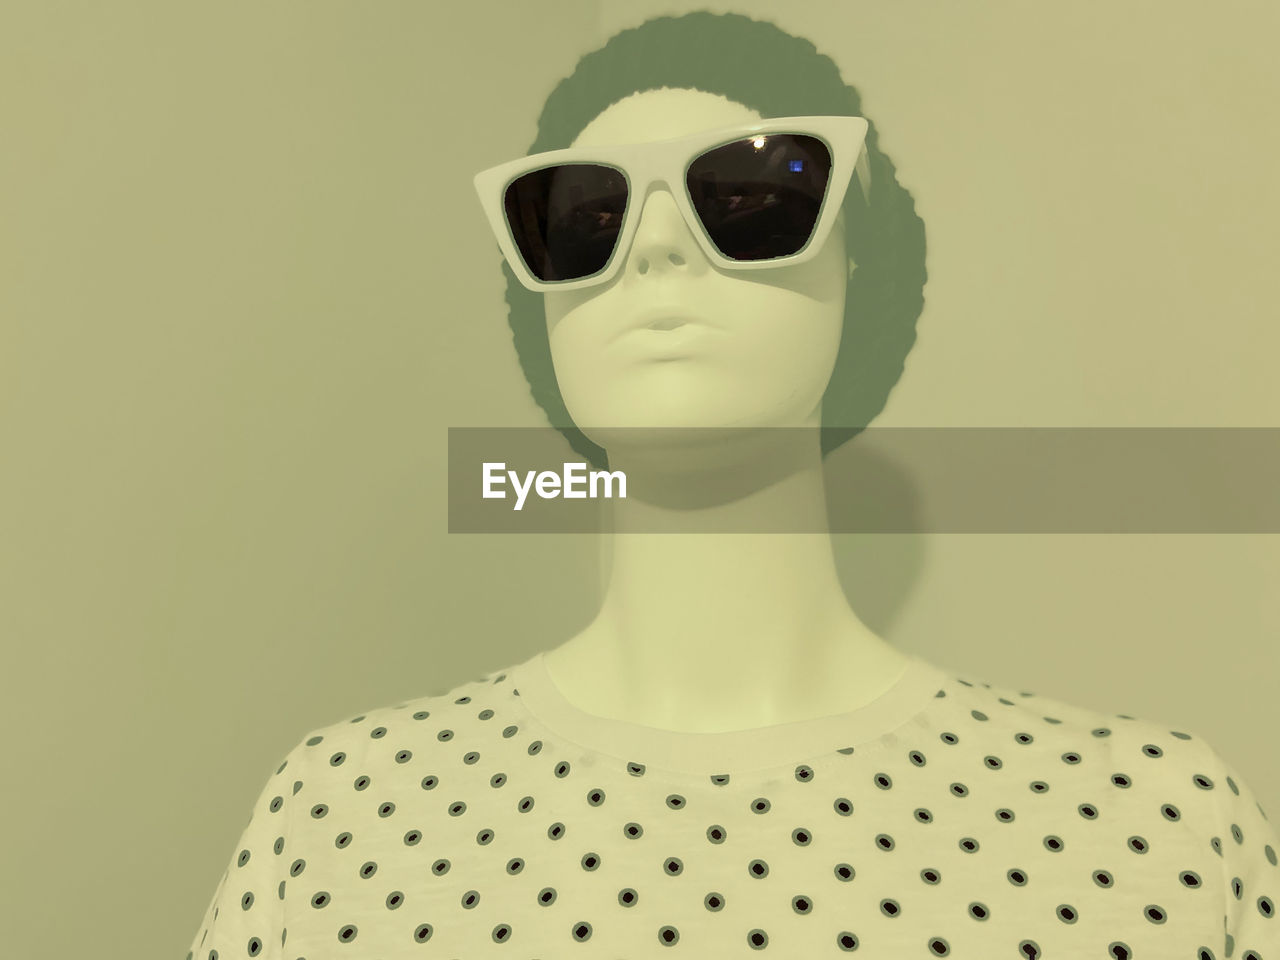 Mannequin wearing a hat and sunglasses on a modern realistic pop art style setting. Pop Style Art Concert Studio Singer  People Rock Star Woman Girl Adult Advertisement HEAD Mannequin Retro Young Trendy Hat Hipster Chic Portrait Sunglasses Doll Concept Color Blue Apple Smart Phone Clothing Design Female Modern Feminine  Grunge Fashion Copy Space Dummy Merchant Pose